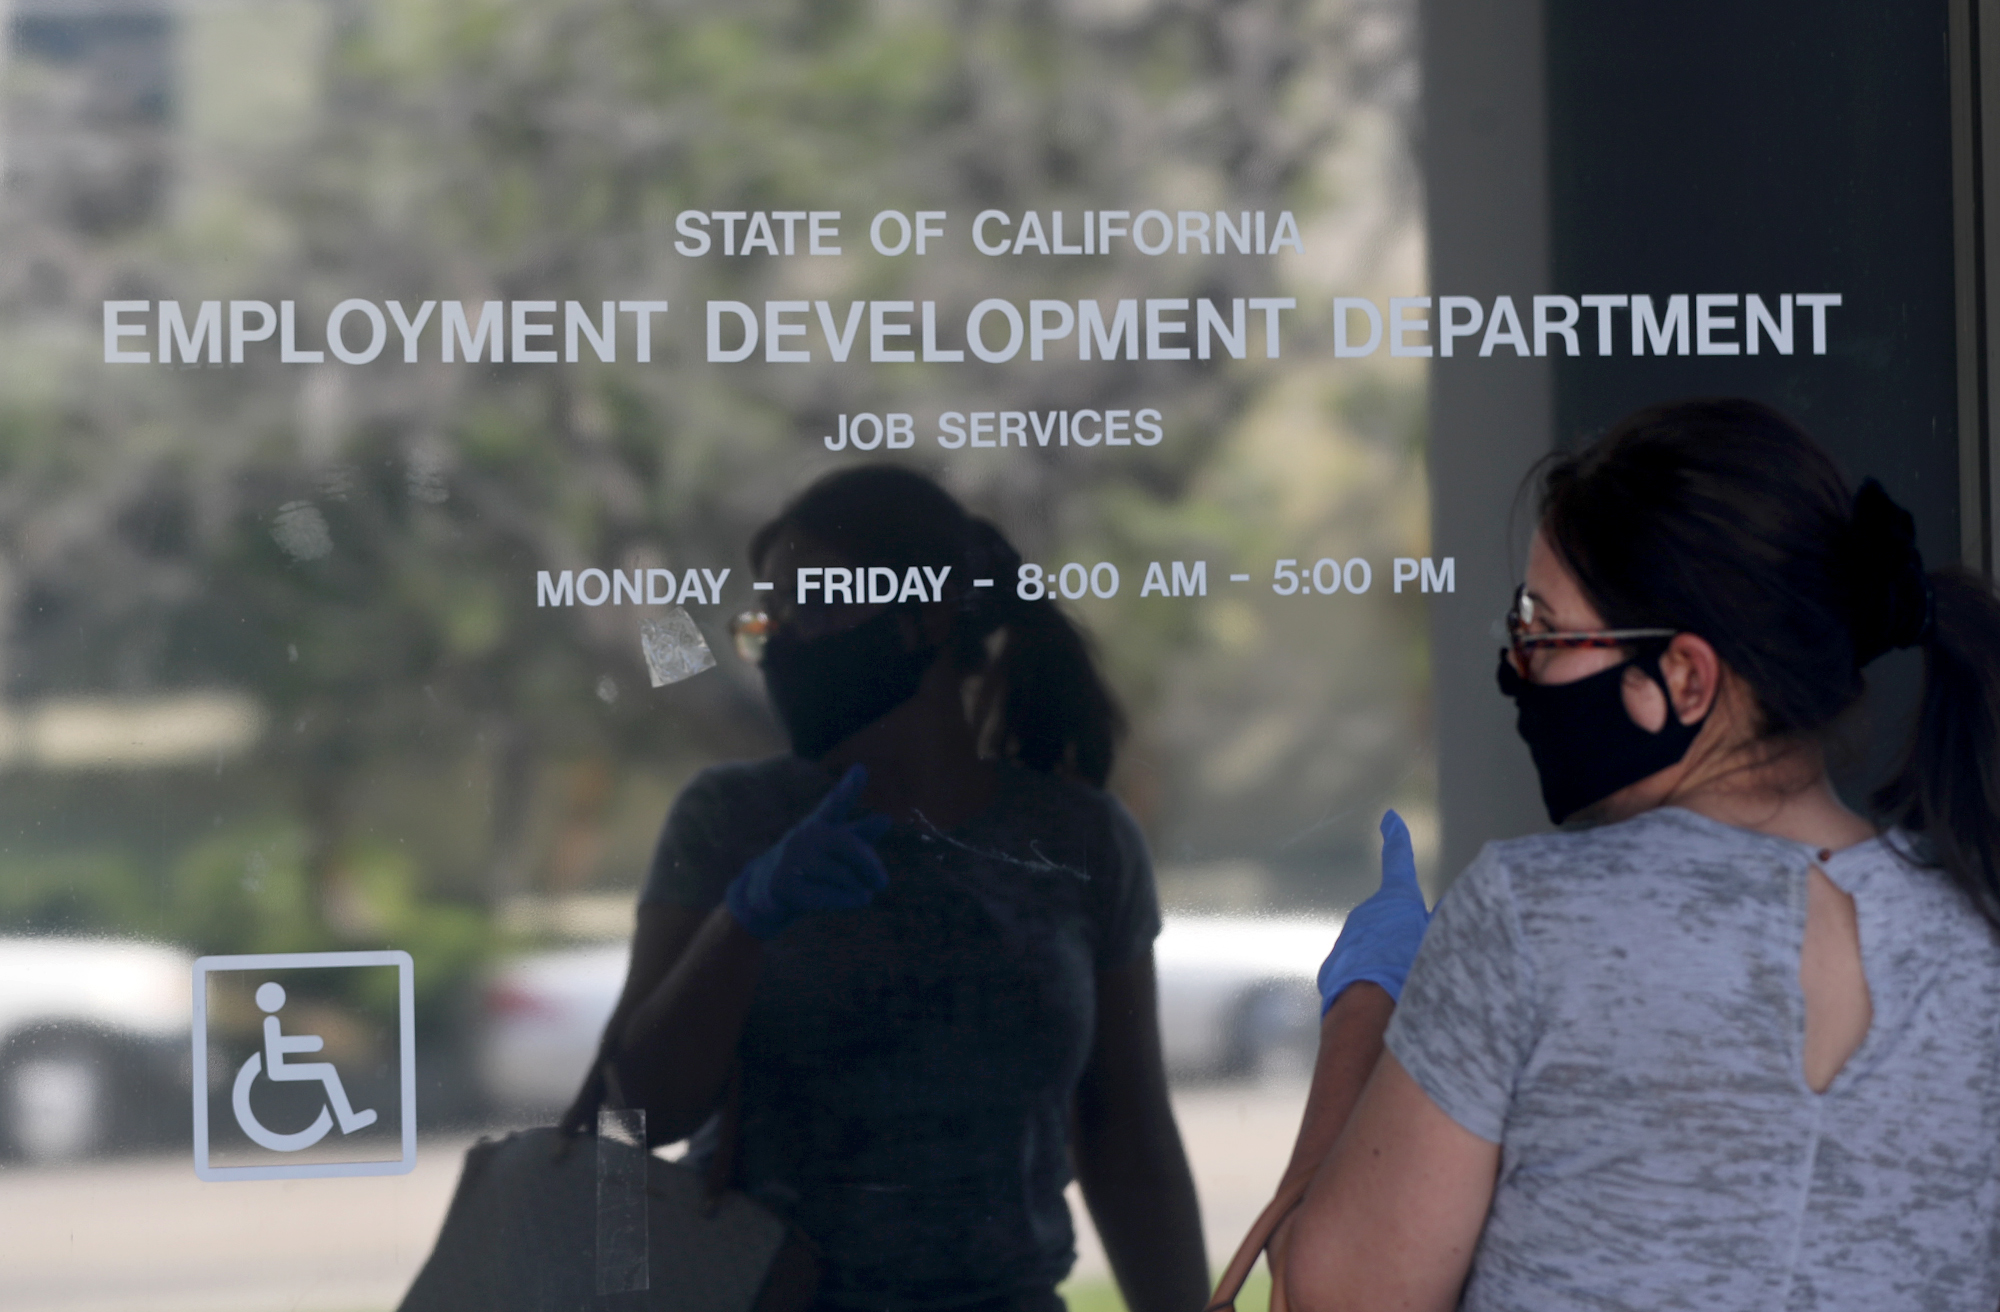 More than $ 200 billion in unemployment benefits may have gone to fraudsters in the pandemic